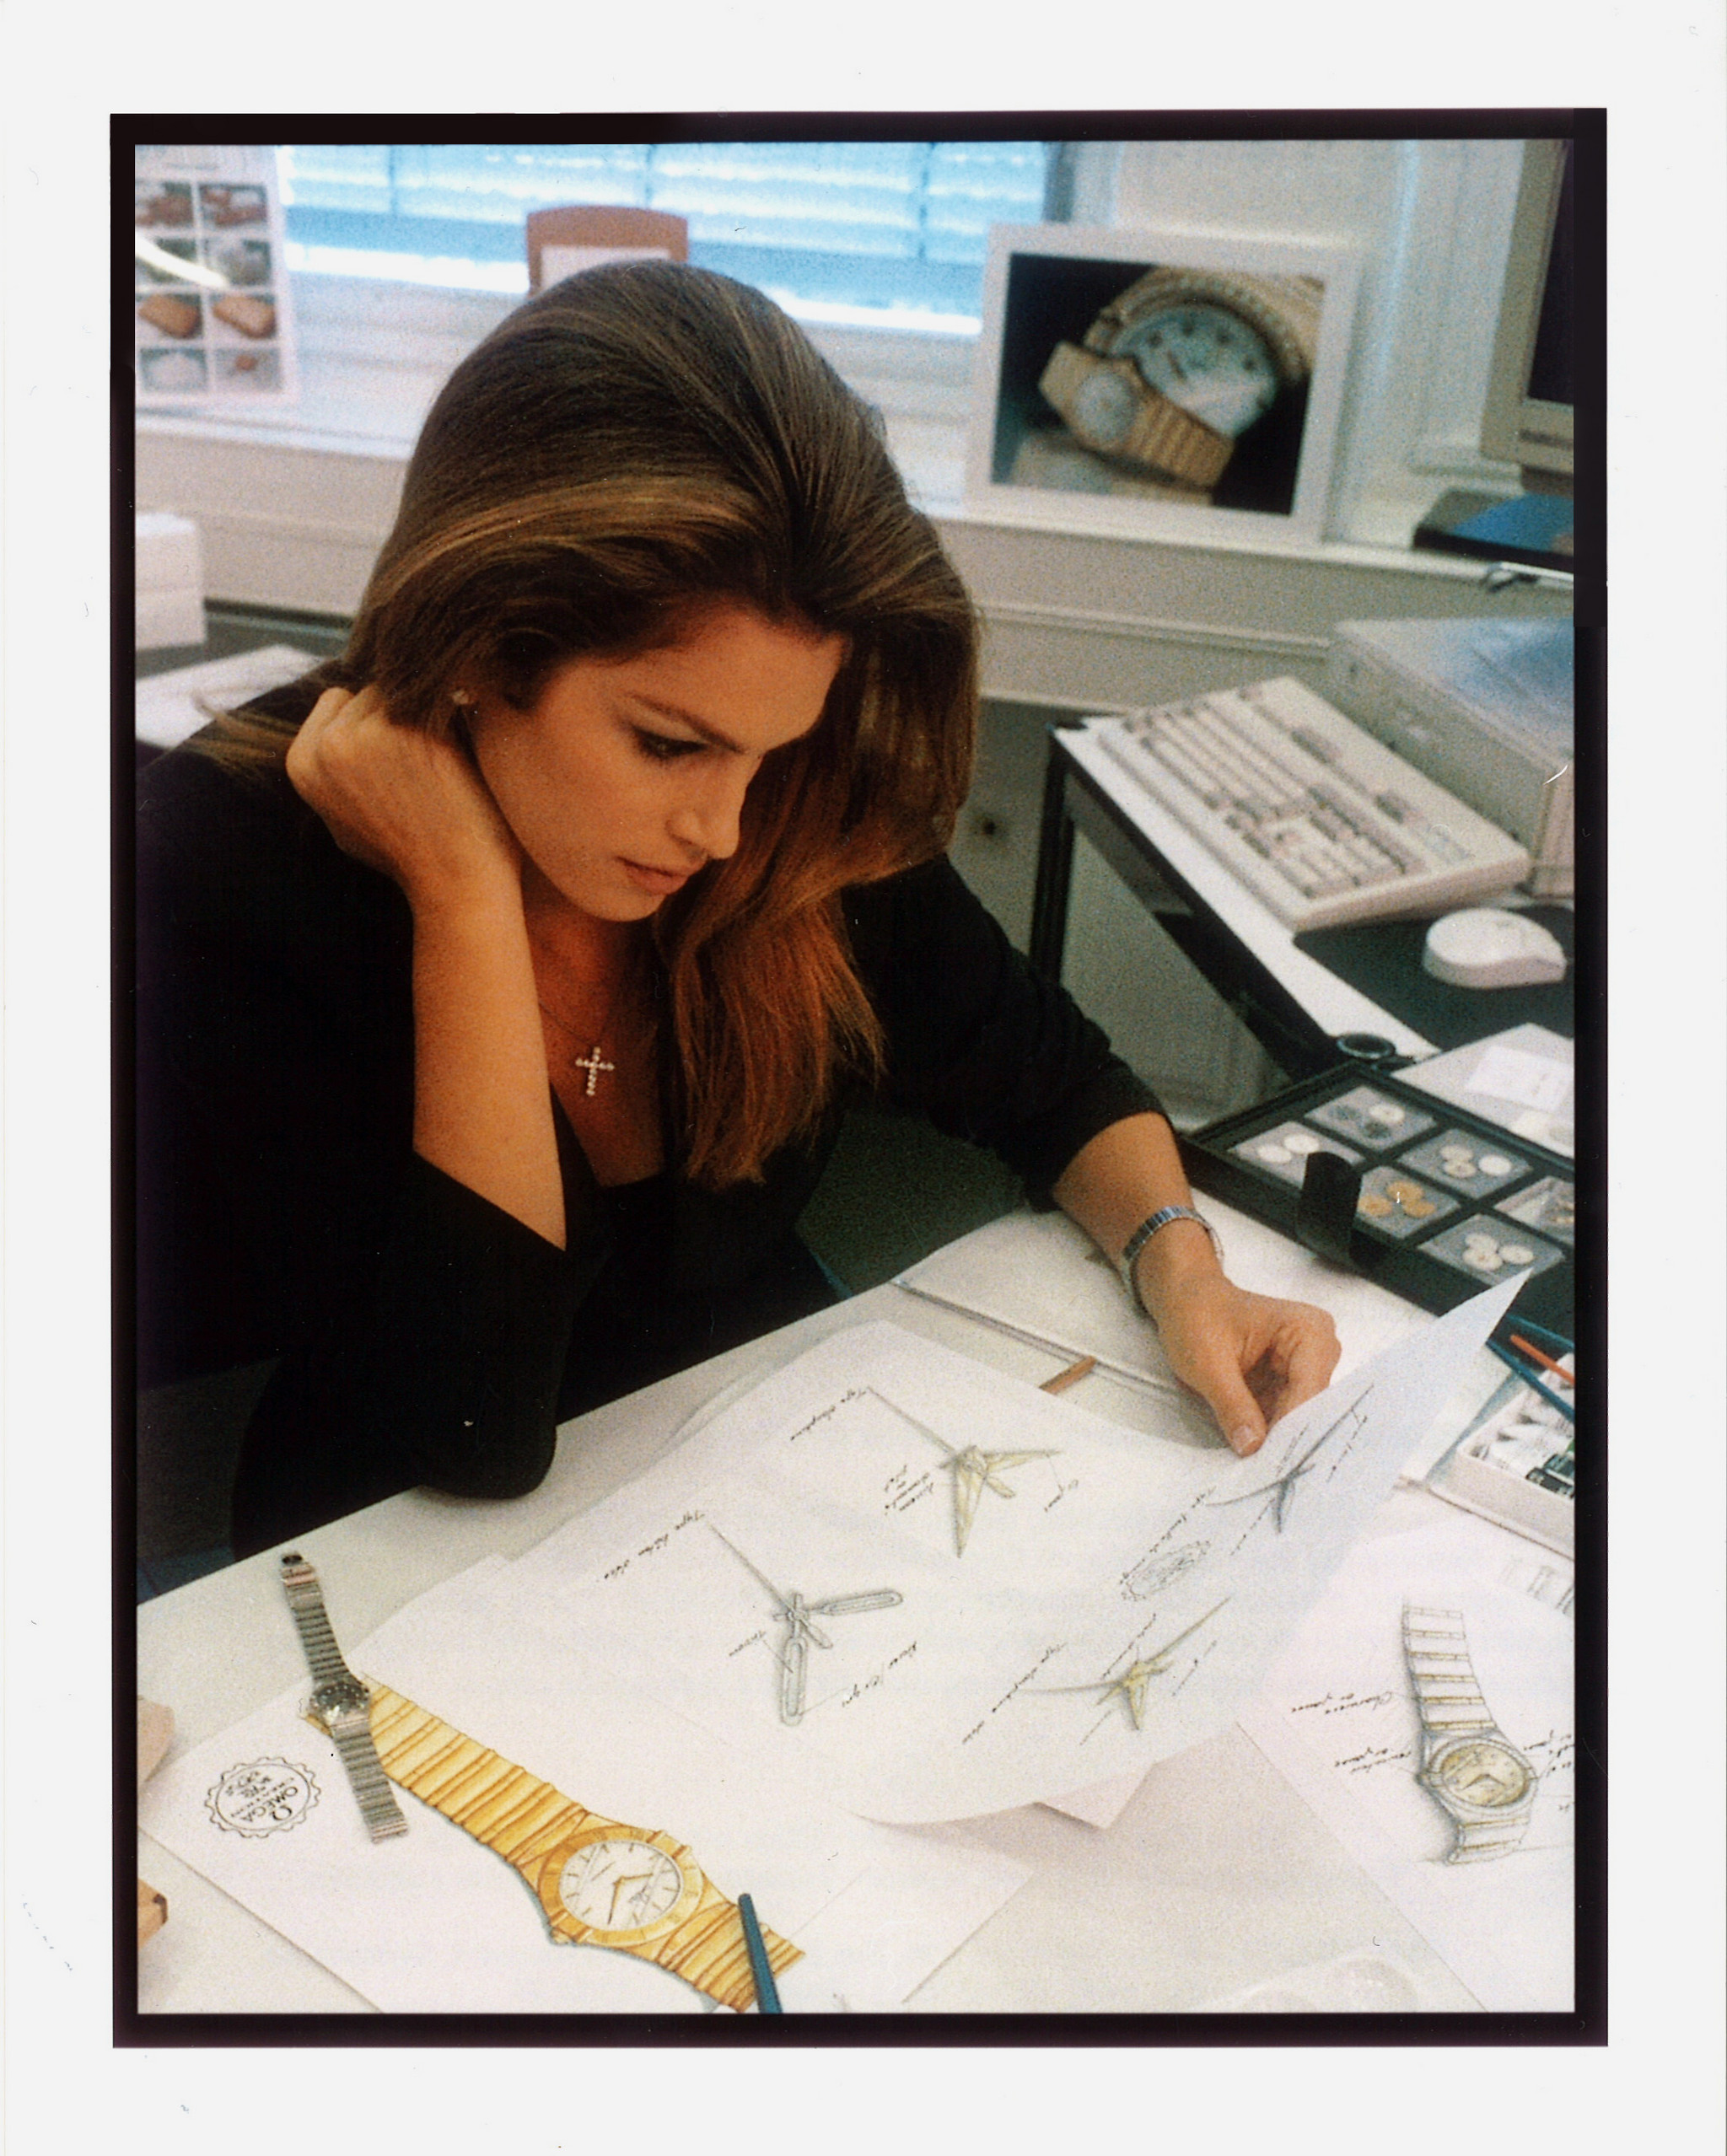 1996_Cindy Crawford working on the Constellation design at Omega in Bienne_1.jpg